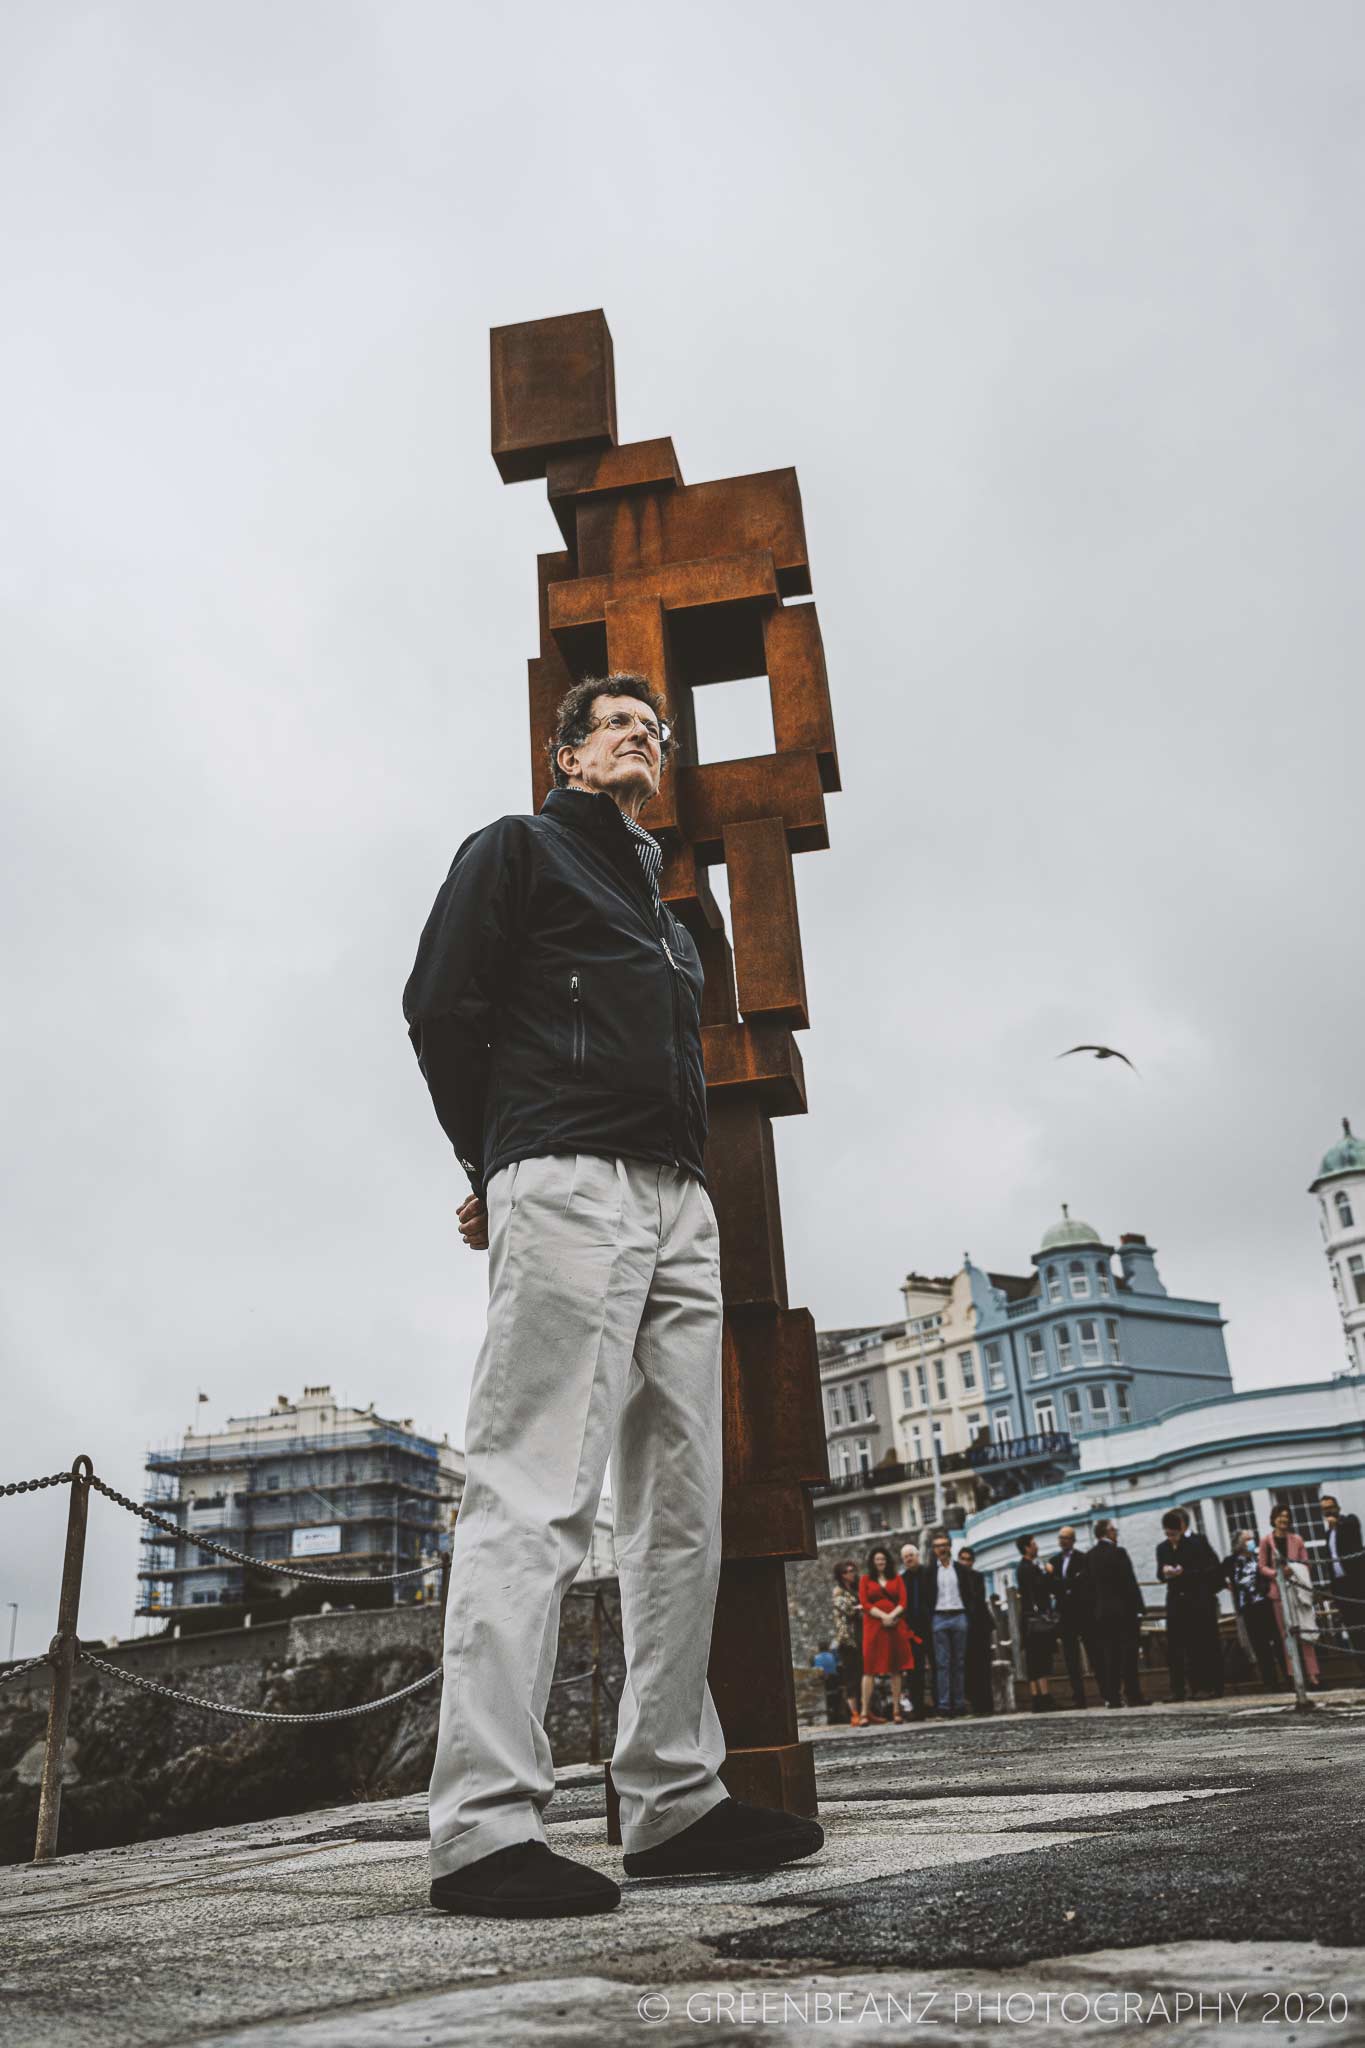 Sir Antony Gormley in Plymouth with his work 'LOOK II' 22/09/2020